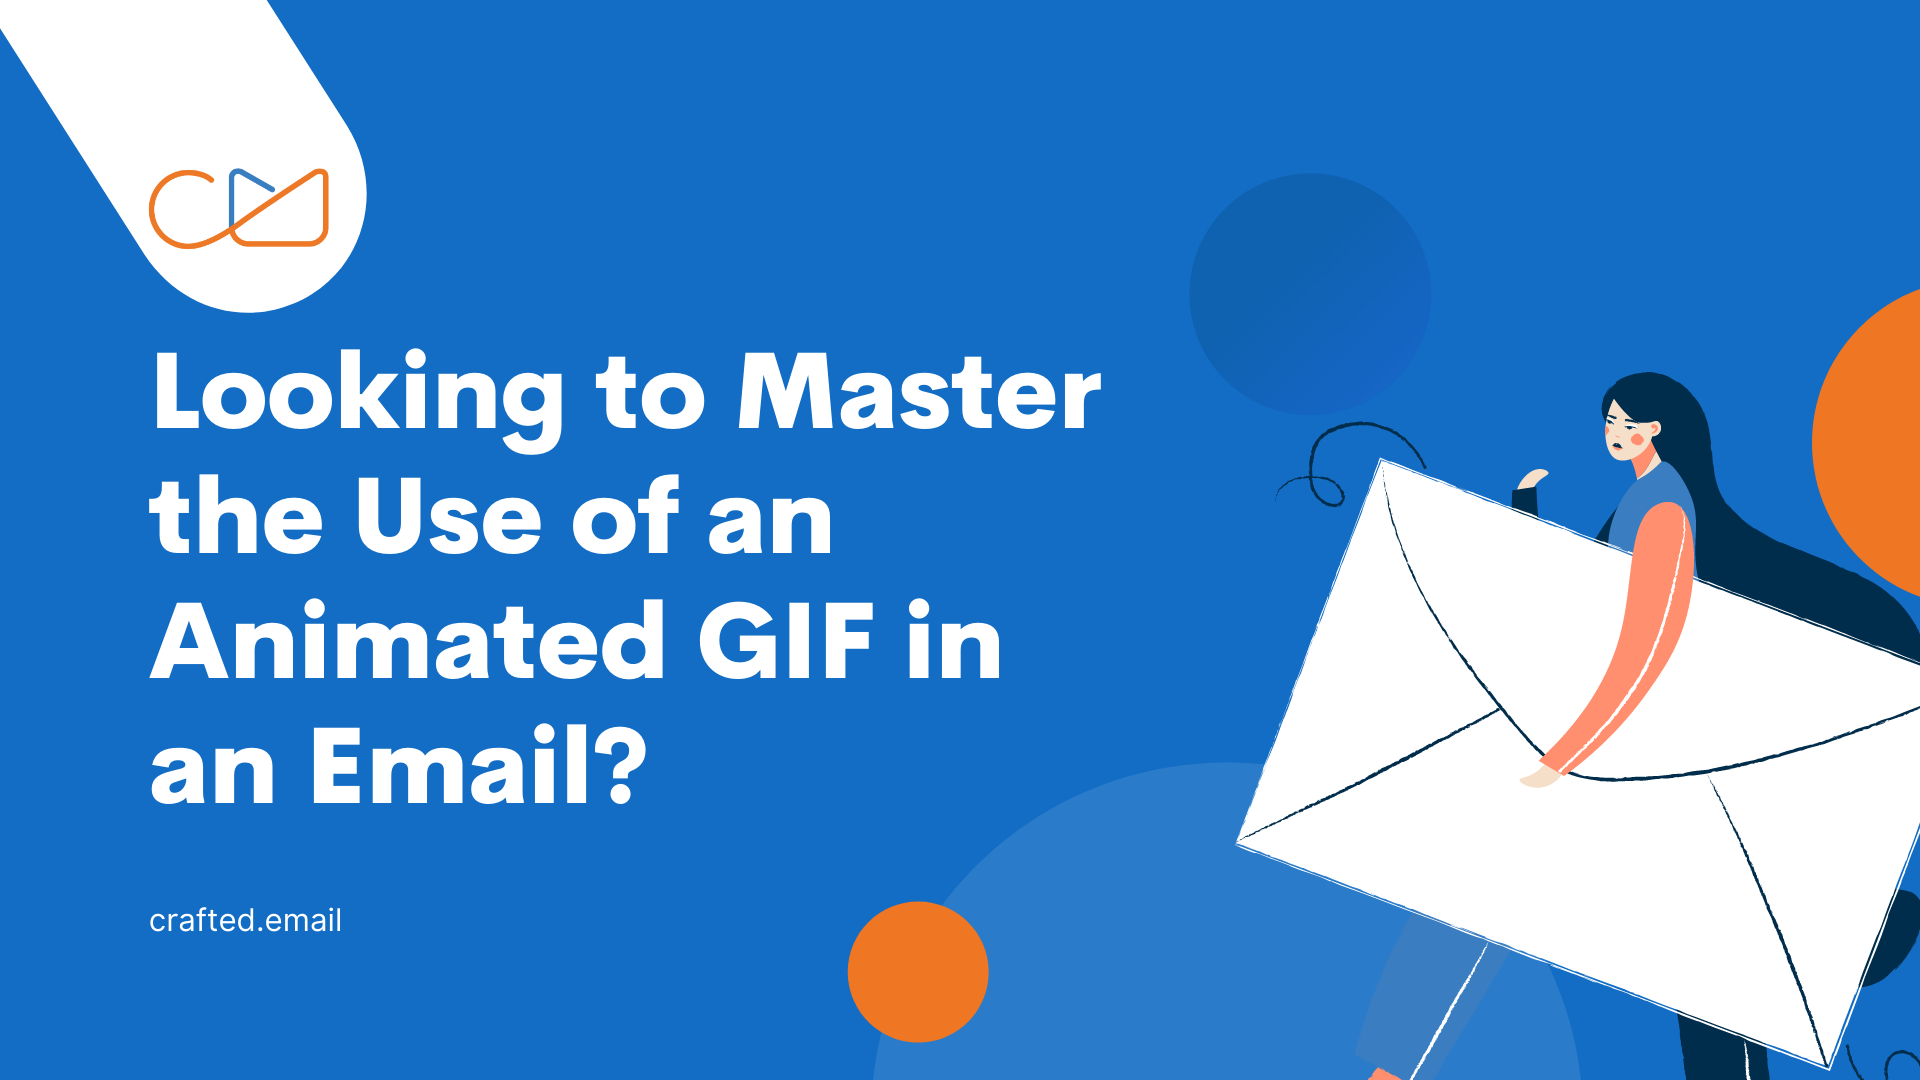 Looking to Master the Use of an Animated GIF in an Email? Here’s What You Need to Know!